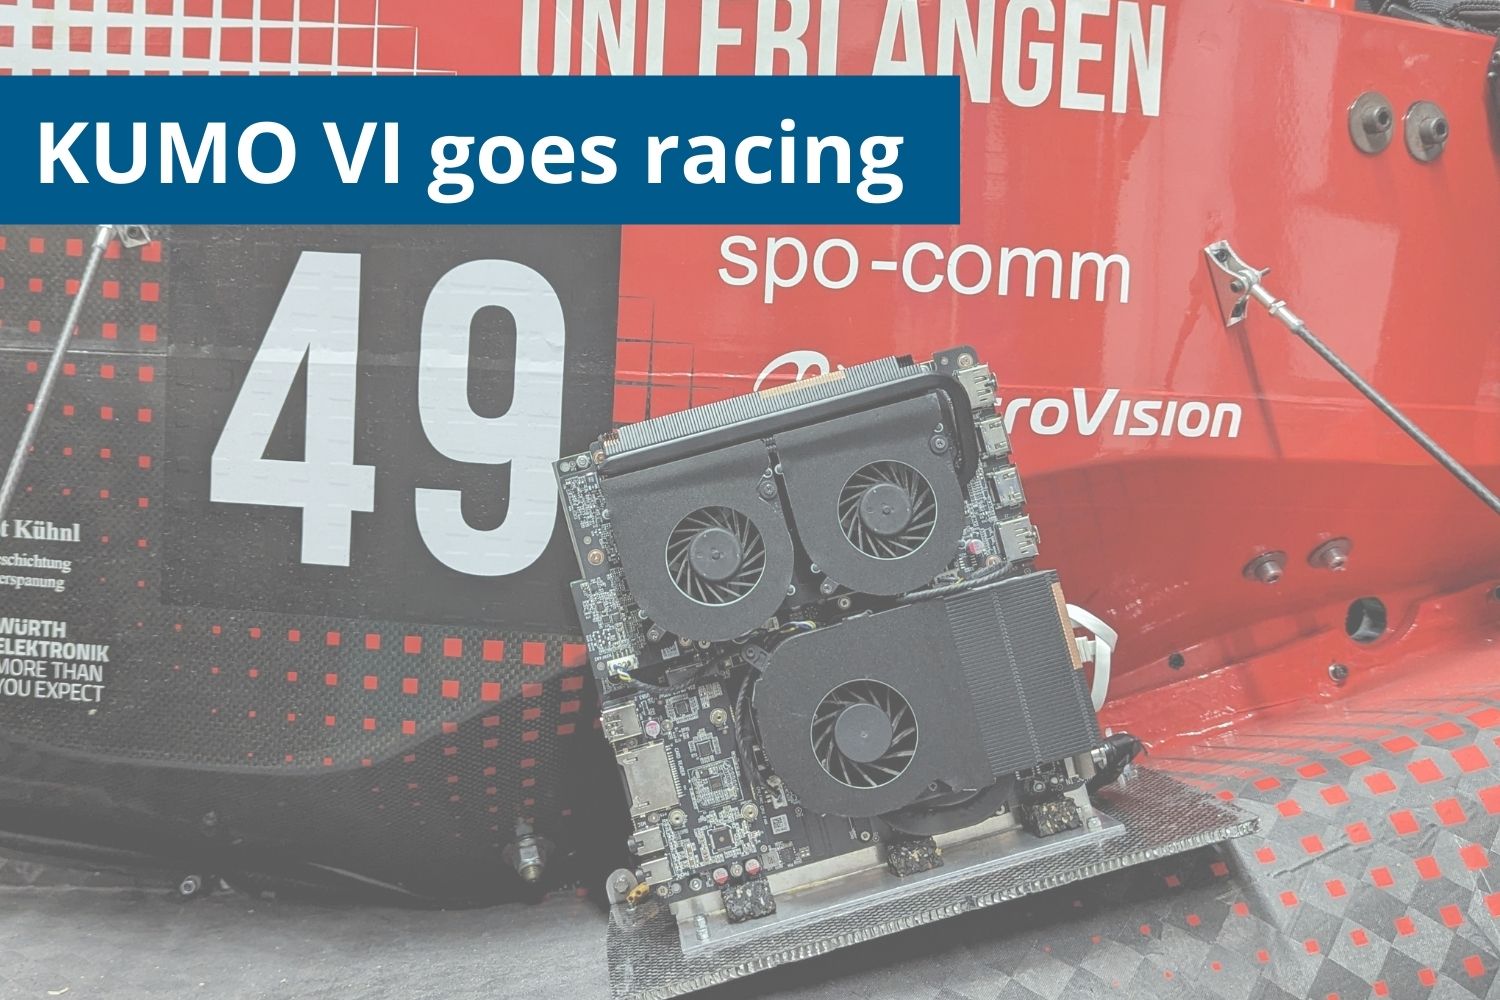 KUMO VI goes racing – our Mini-PC for the Octanes